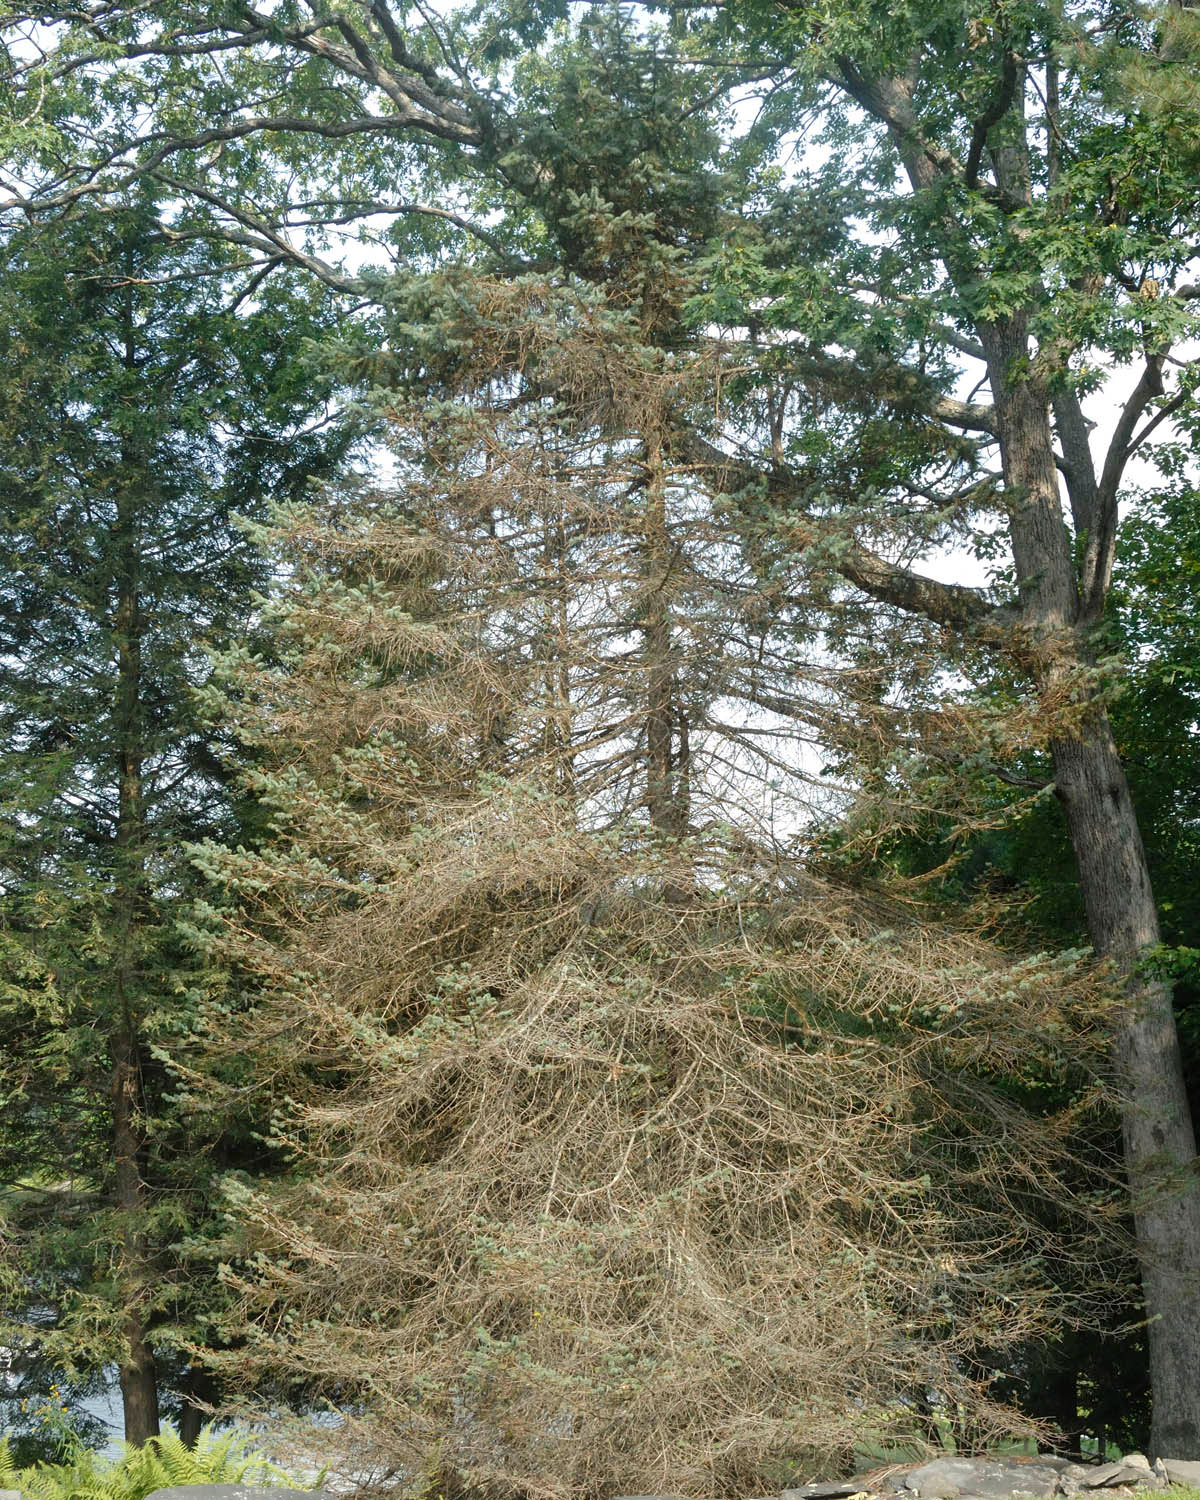 This eastern hemlock tree is largely denuded by hemlock wooly adelgid (HWA). This was a smaller tree; it only took three years from the first sign of HWA until the tree was dead. Several other similar-sized trees on this lake beach in Shohola have also died or had to be cut down.